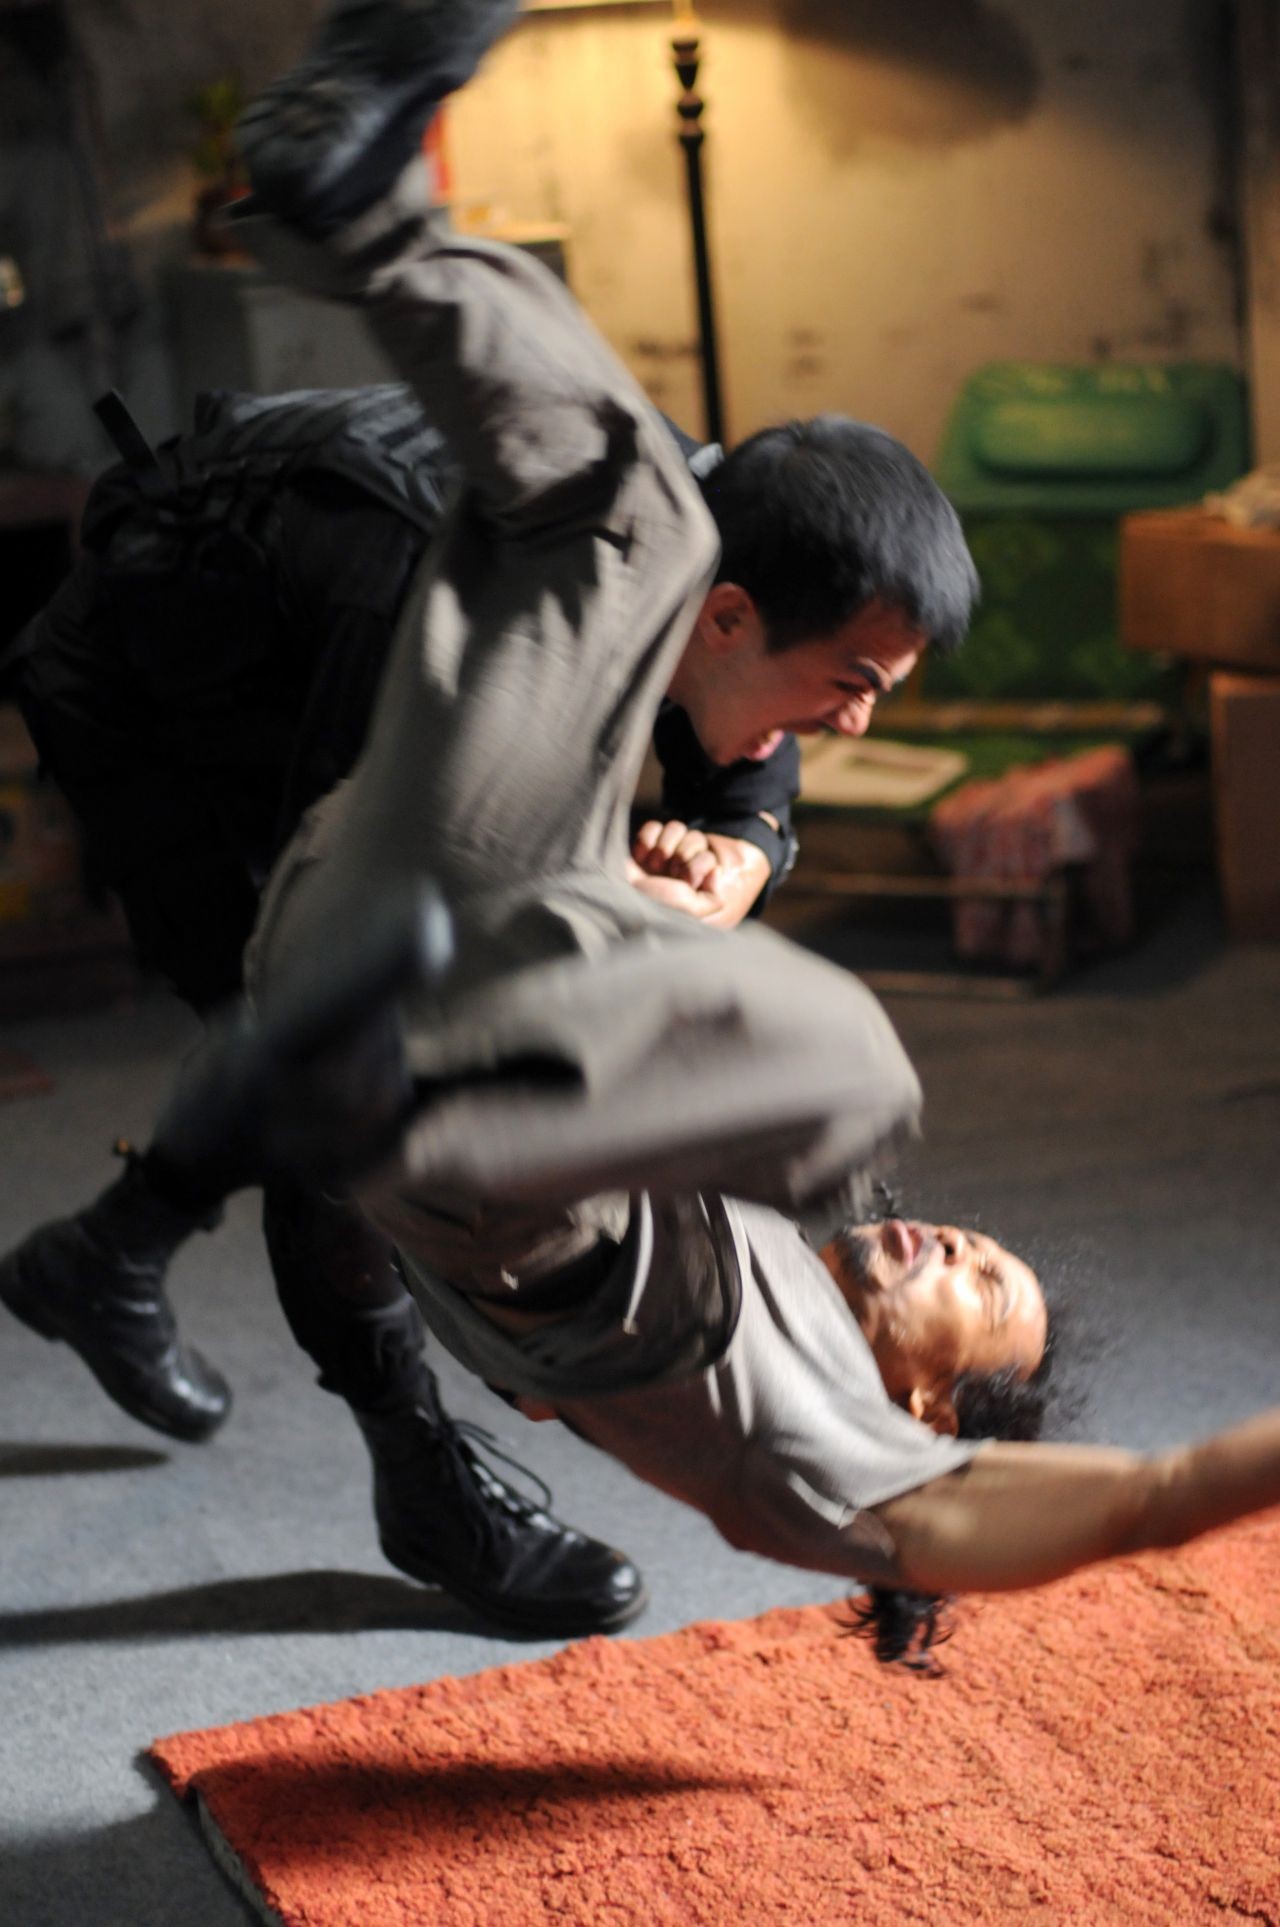 A scene from Sony Pictures Classics' The Raid: Redemption (2012)